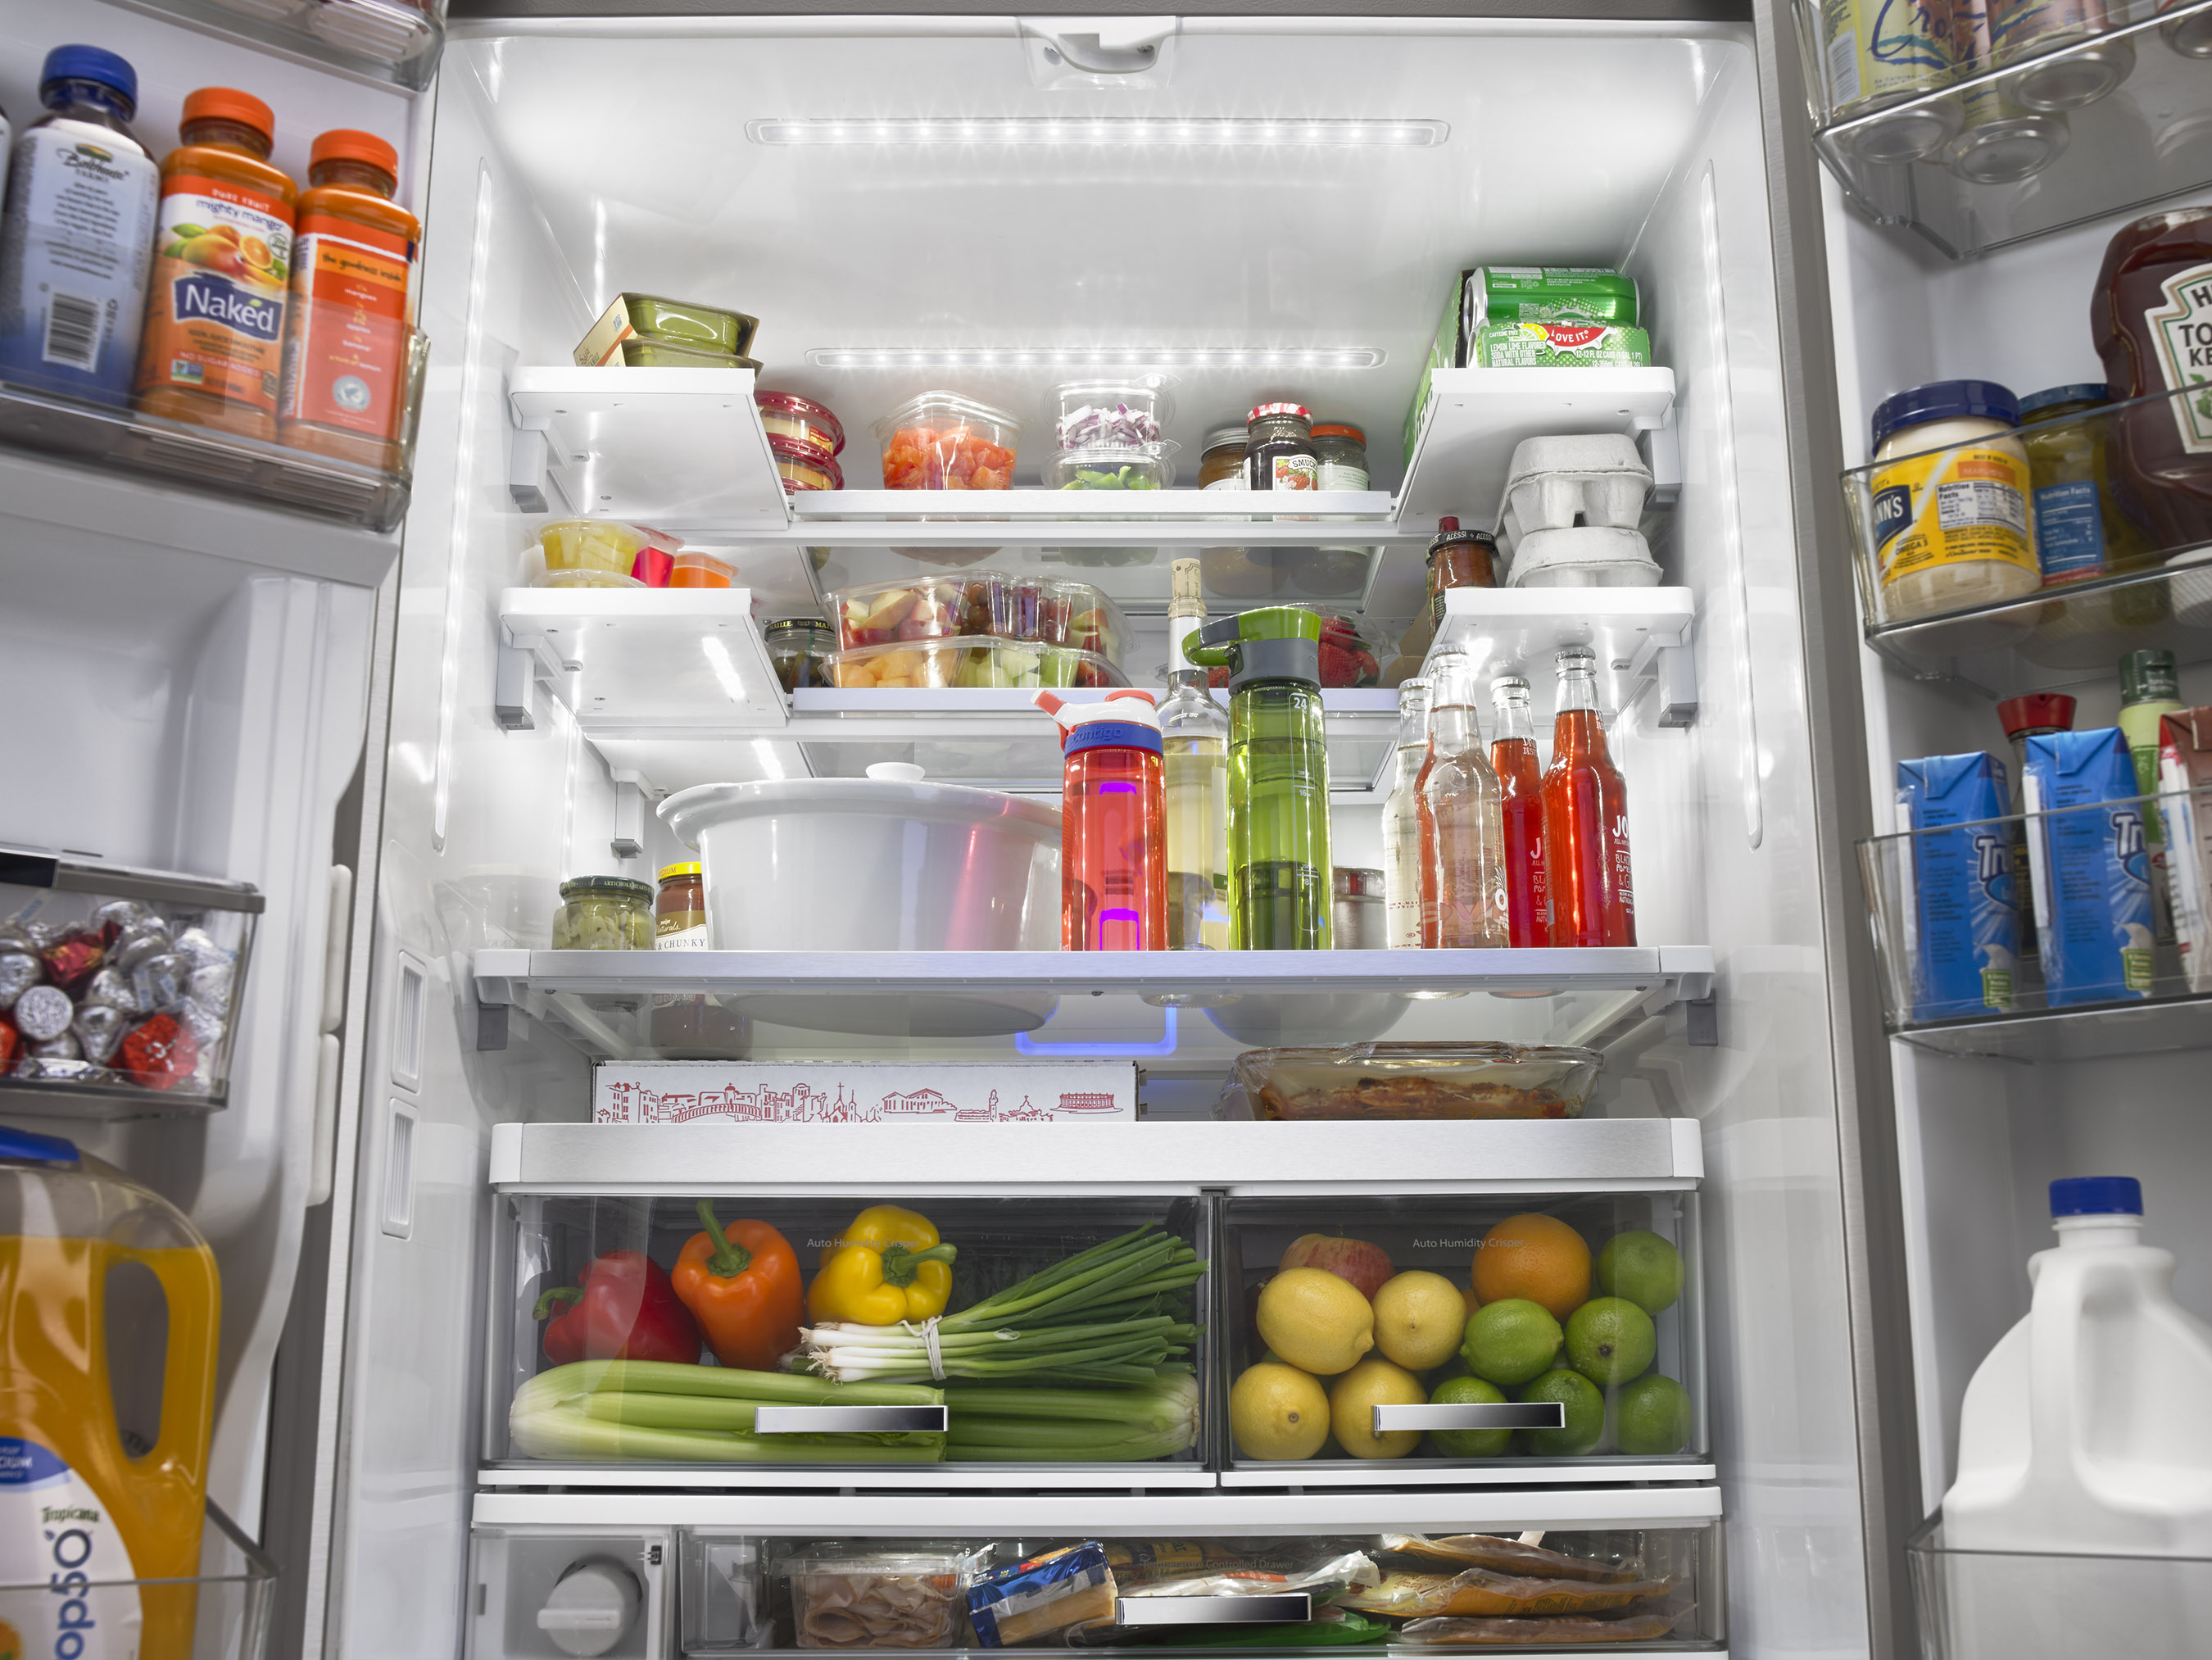 Completely re-imagined on the inside, the Whirlpool® Smart French Door Refrigerator is inspired by the pantry and designed to use space more efficiently so families can fit and find it all.